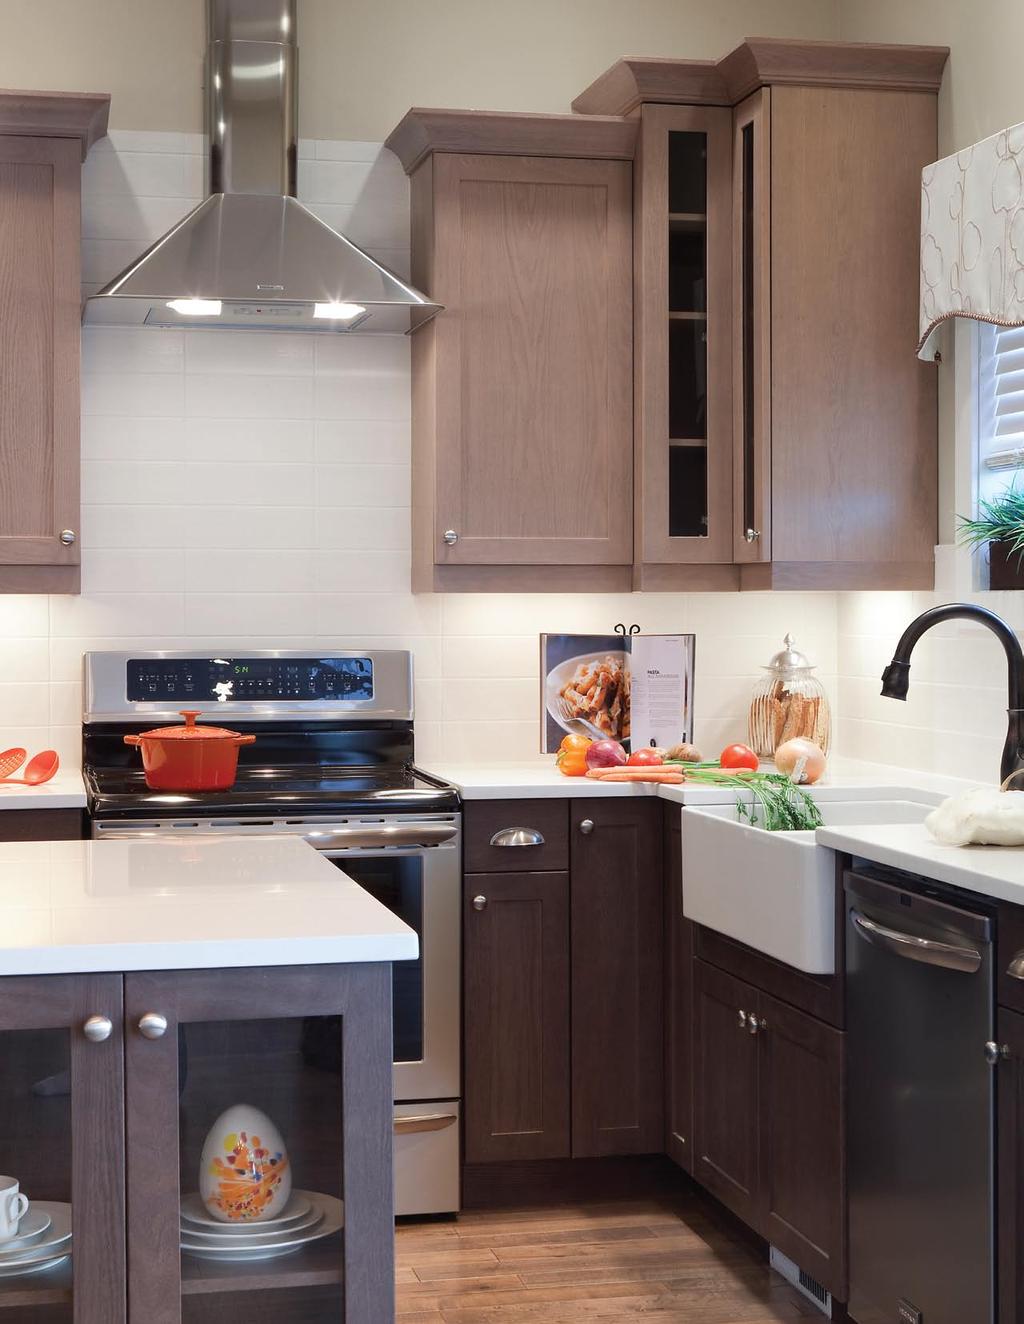 the EFFECT YOU LOVE If you haven t bought cabinetry lately, you ll be stunned at the strengths of cabinetry. Wipe-clean finishes in perfect urban hues and trend-setting styles.